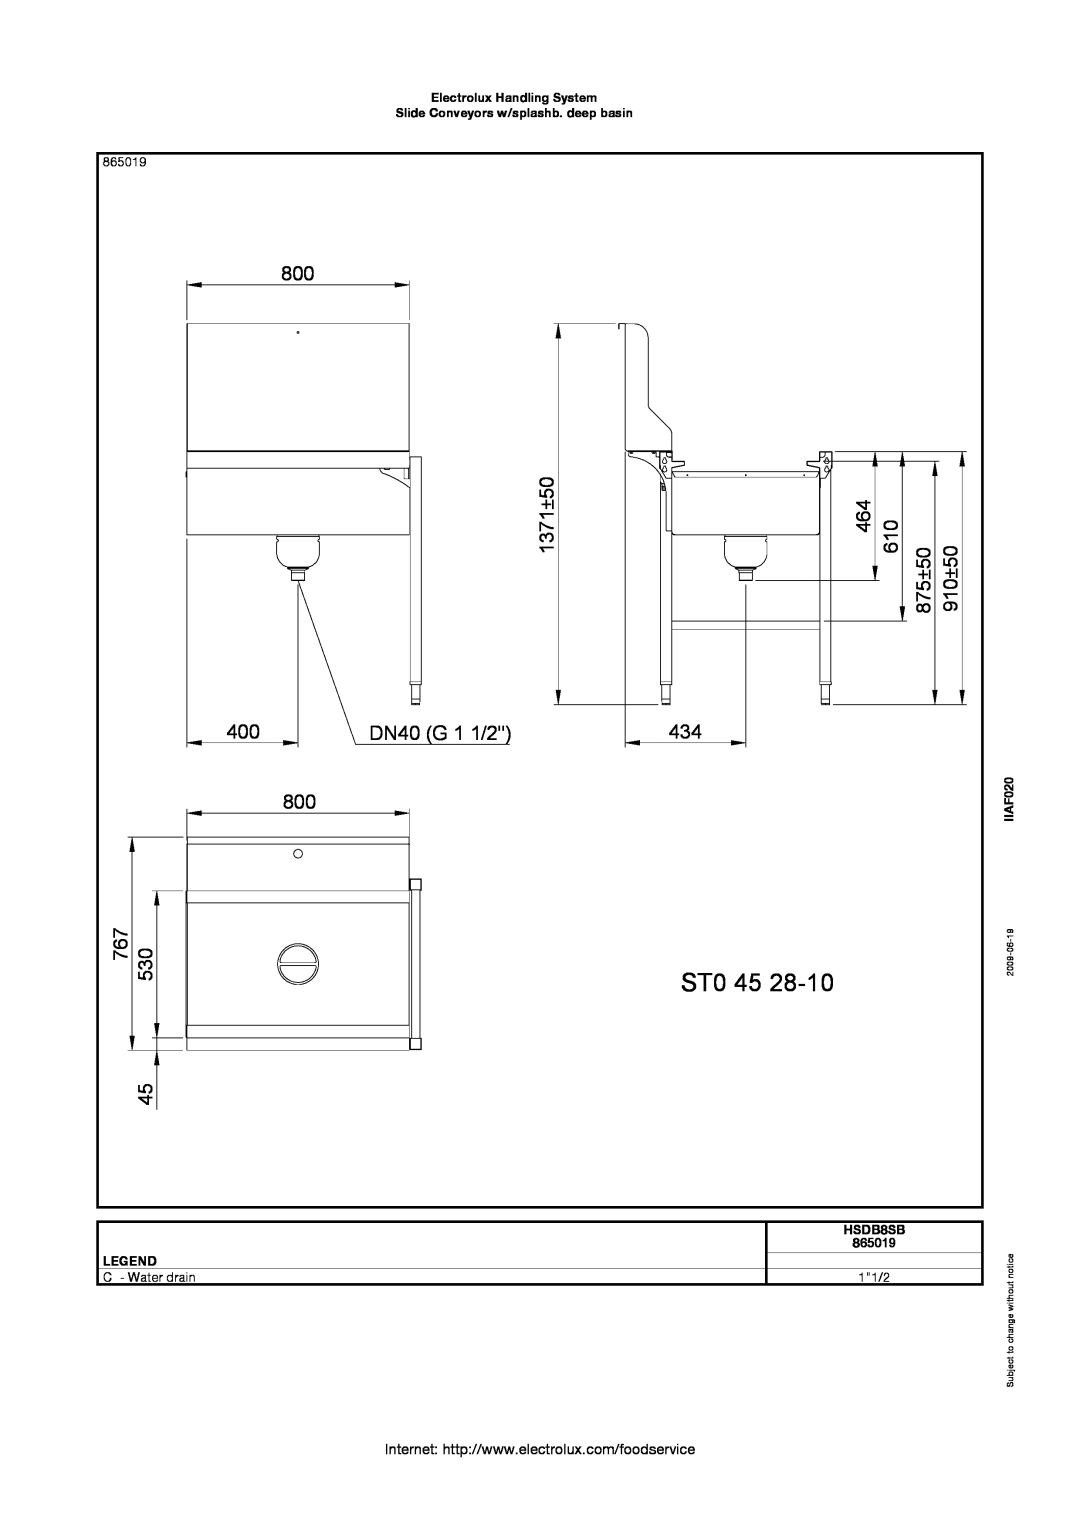 Electrolux SS-6 manual ST0 45, 865019, C - Water drain 